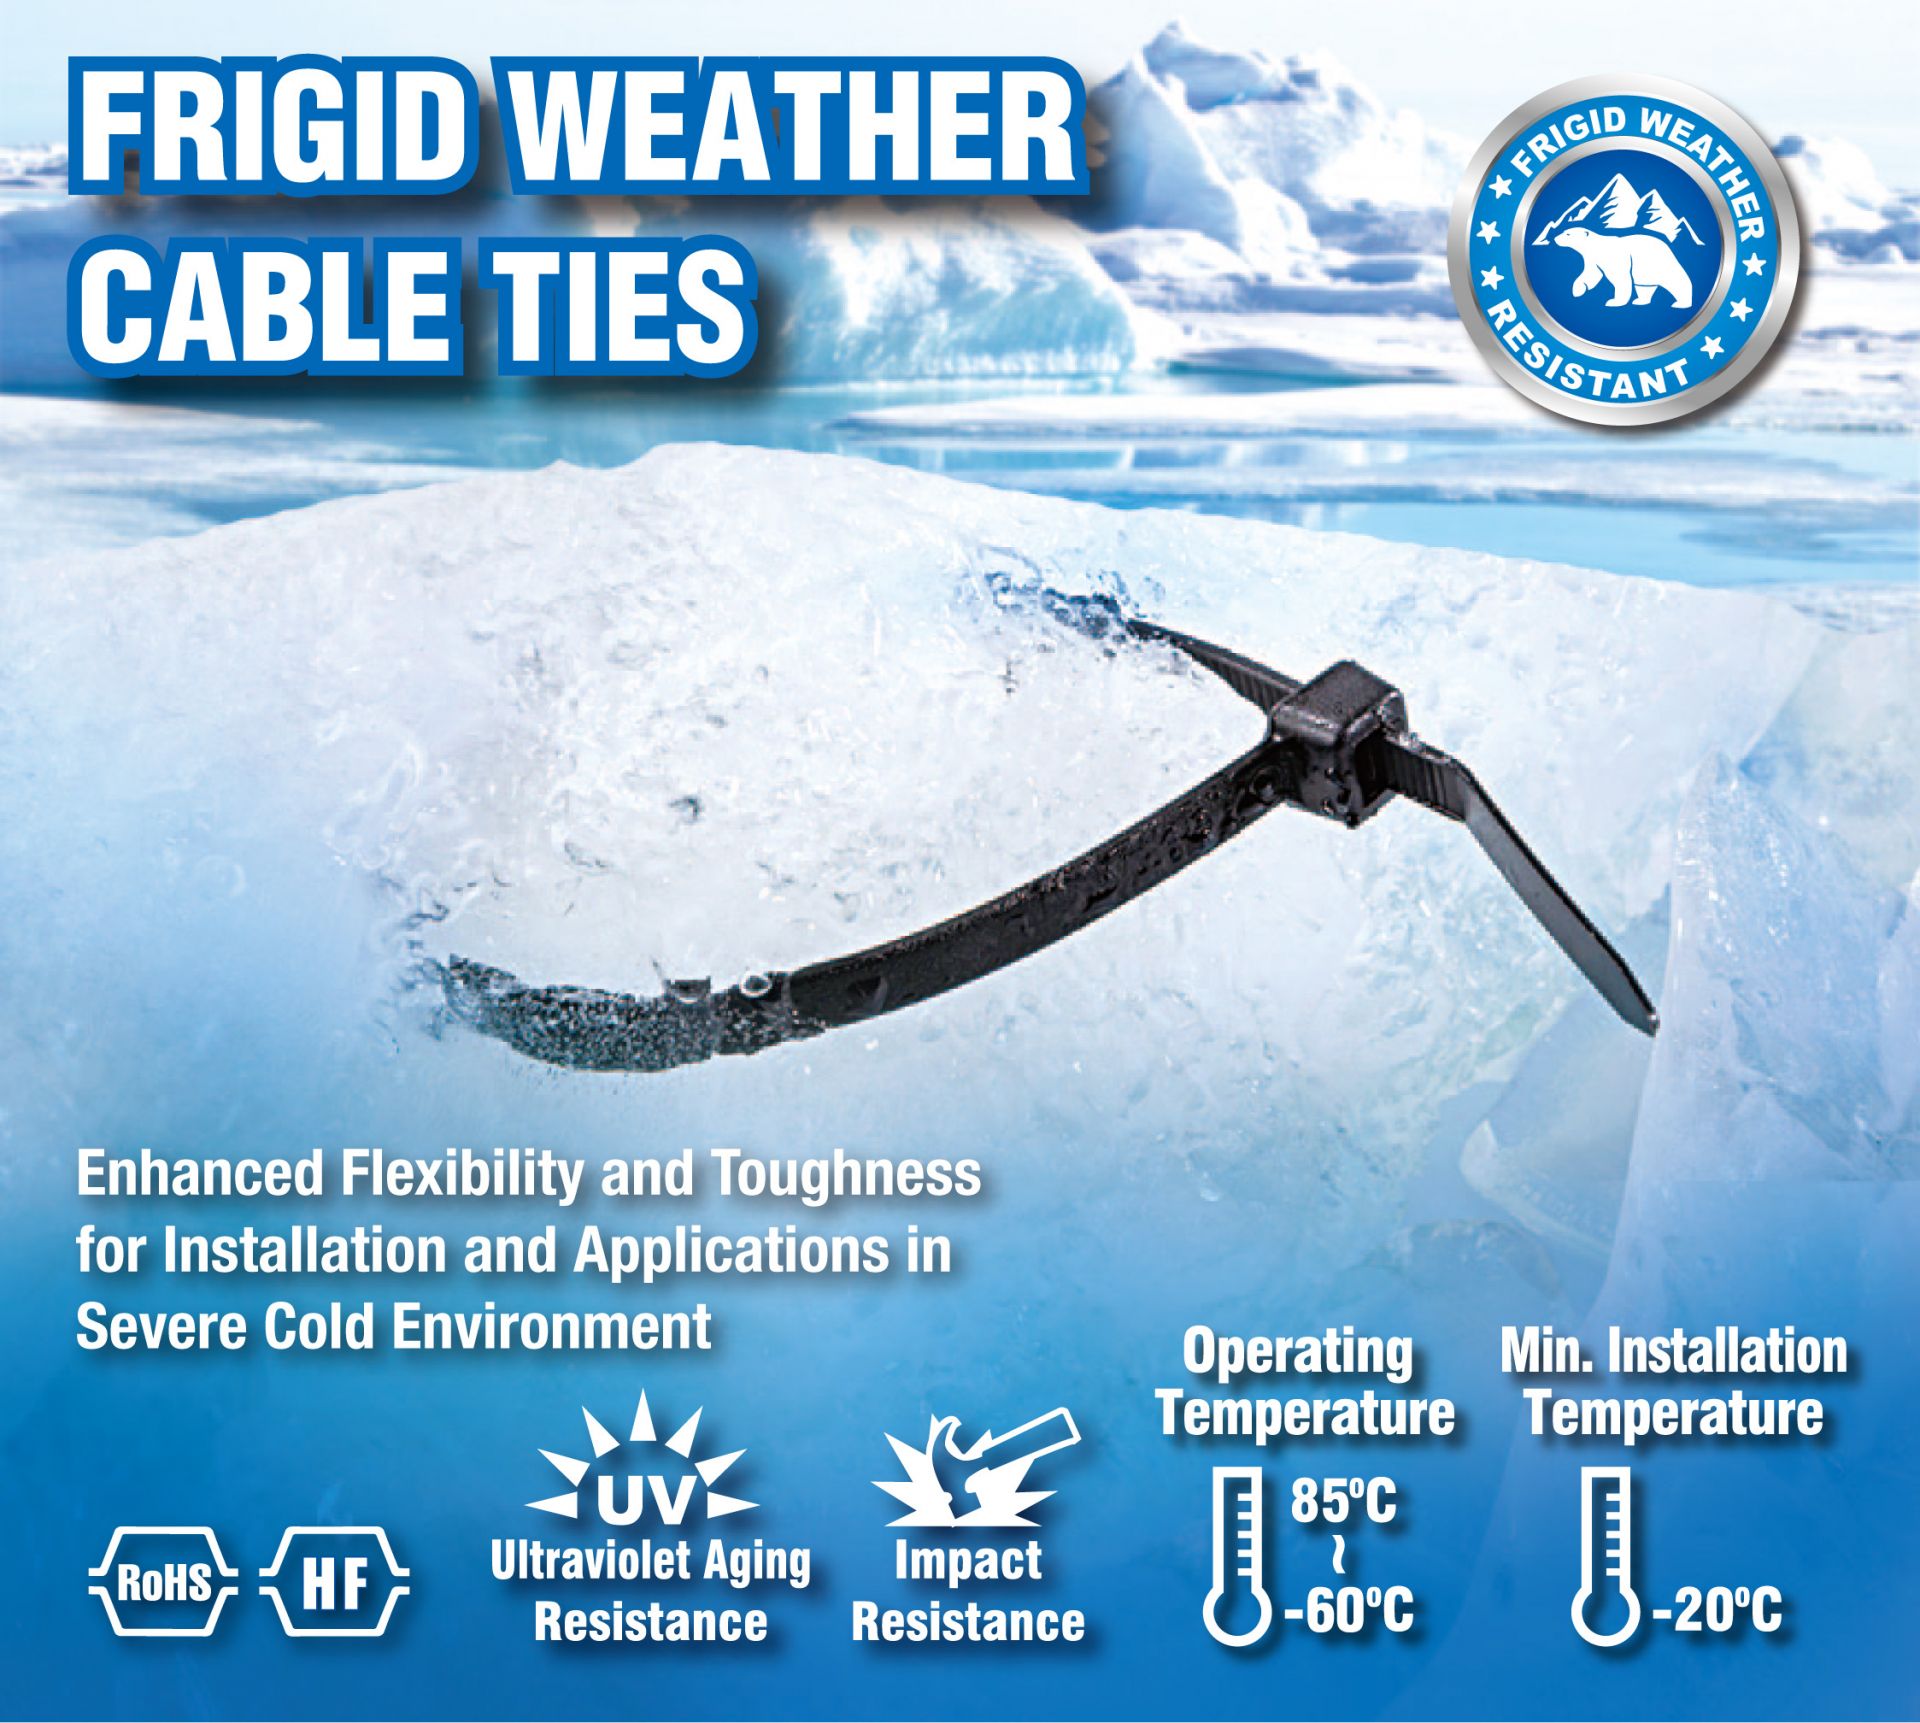 Features and Applications of Frigid Weather Cable Ties